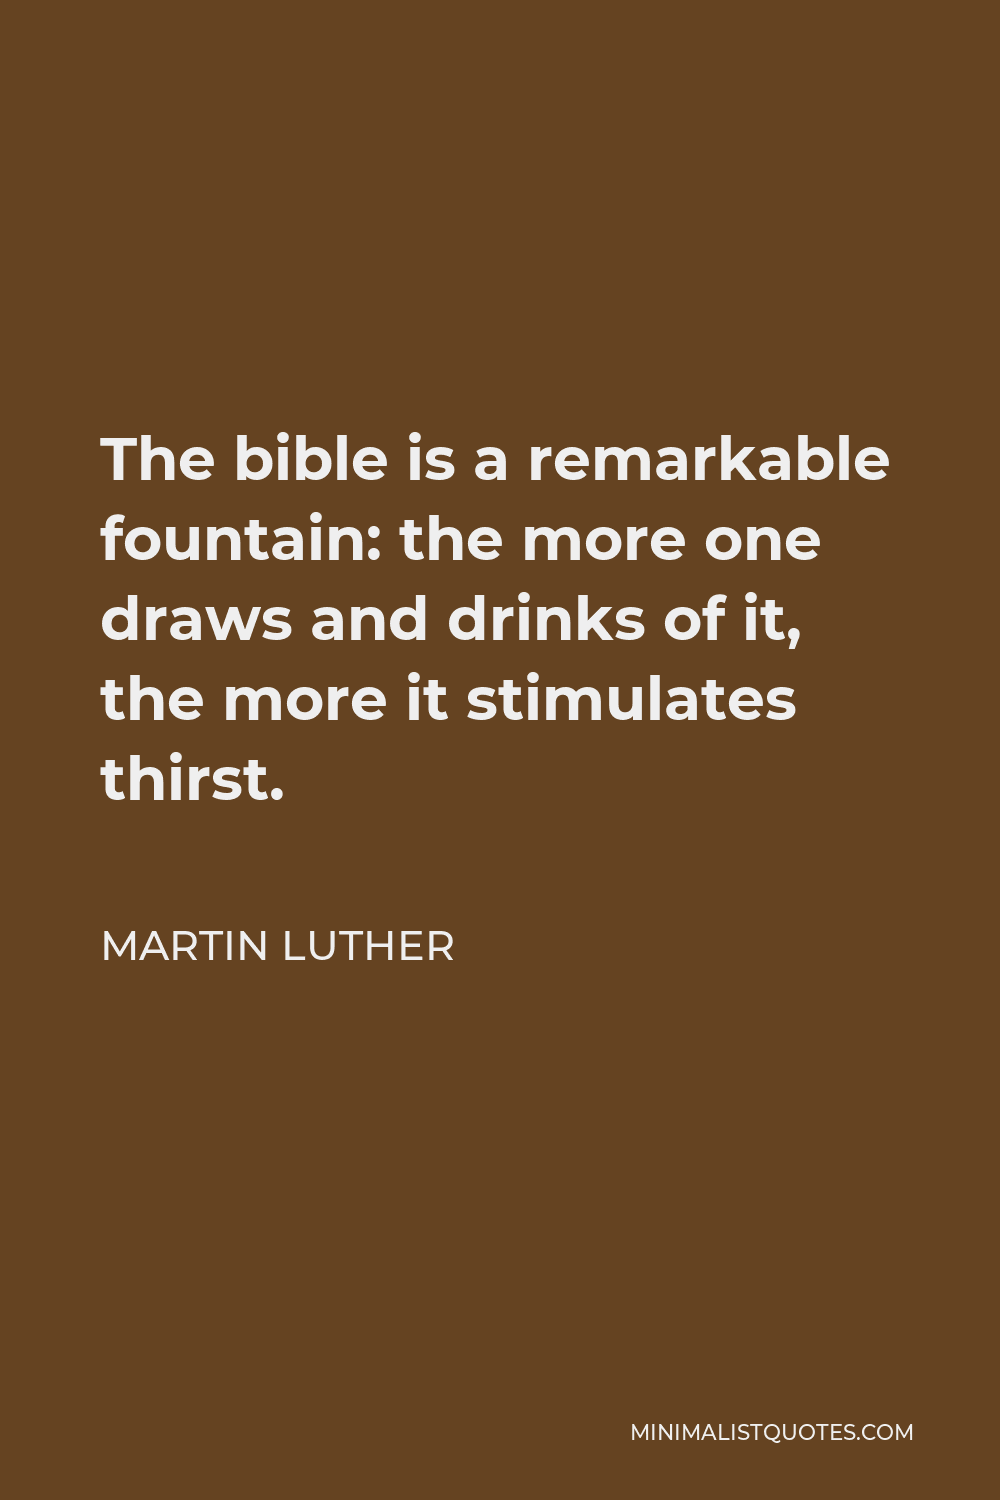 Martin Luther Quote - The bible is a remarkable fountain: the more one draws and drinks of it, the more it stimulates thirst.